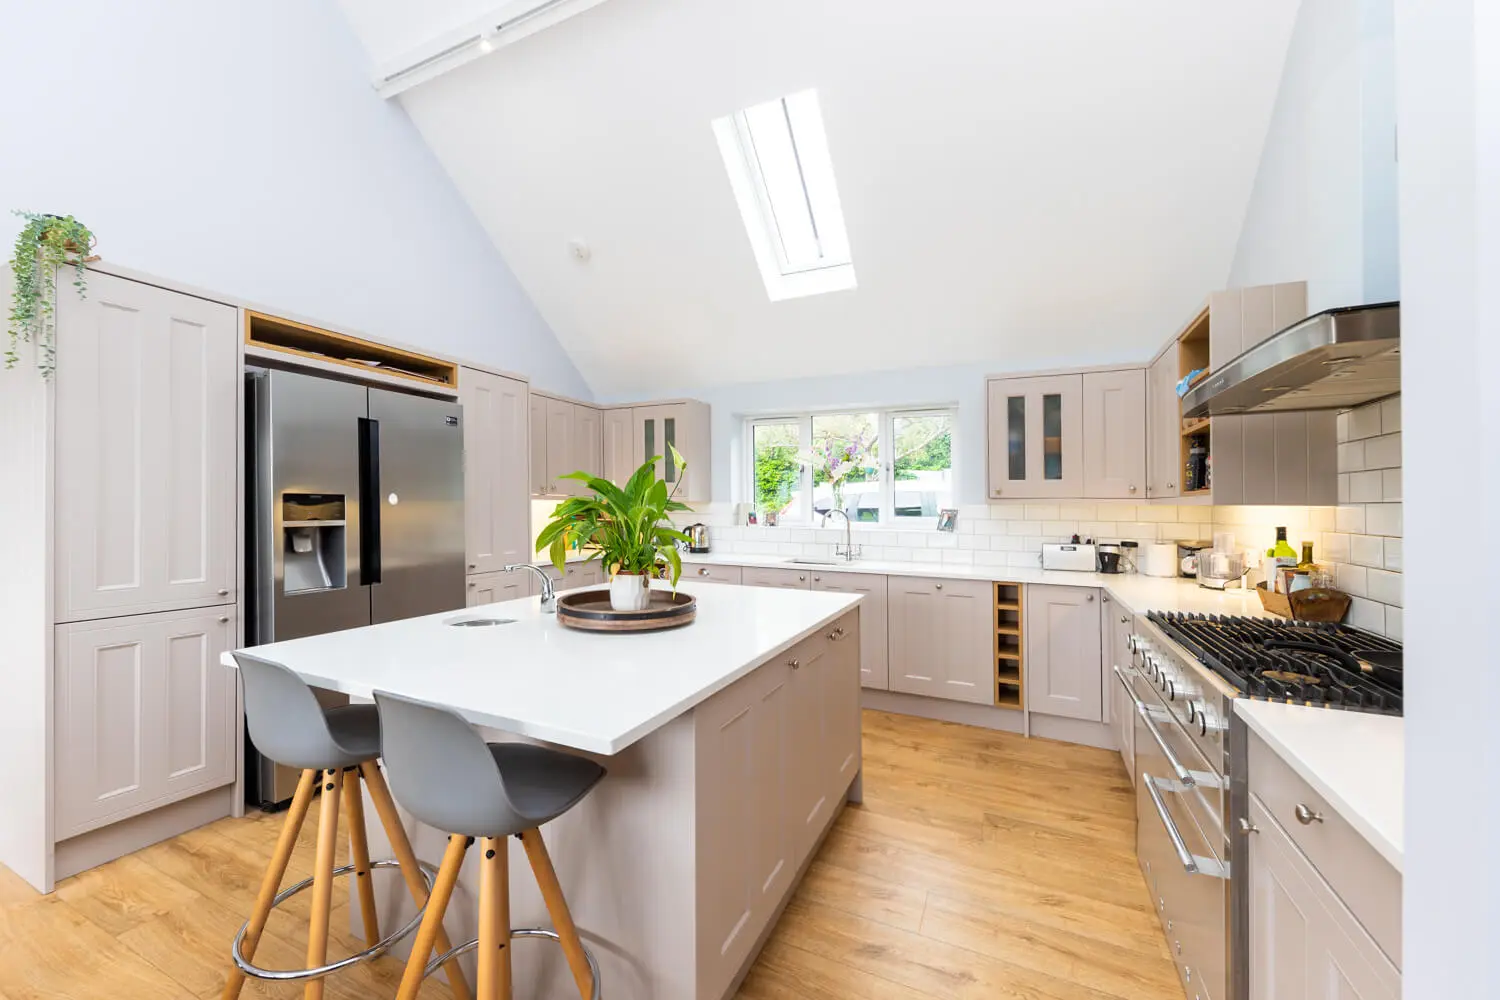 Professional Property Photography for Estate Agents